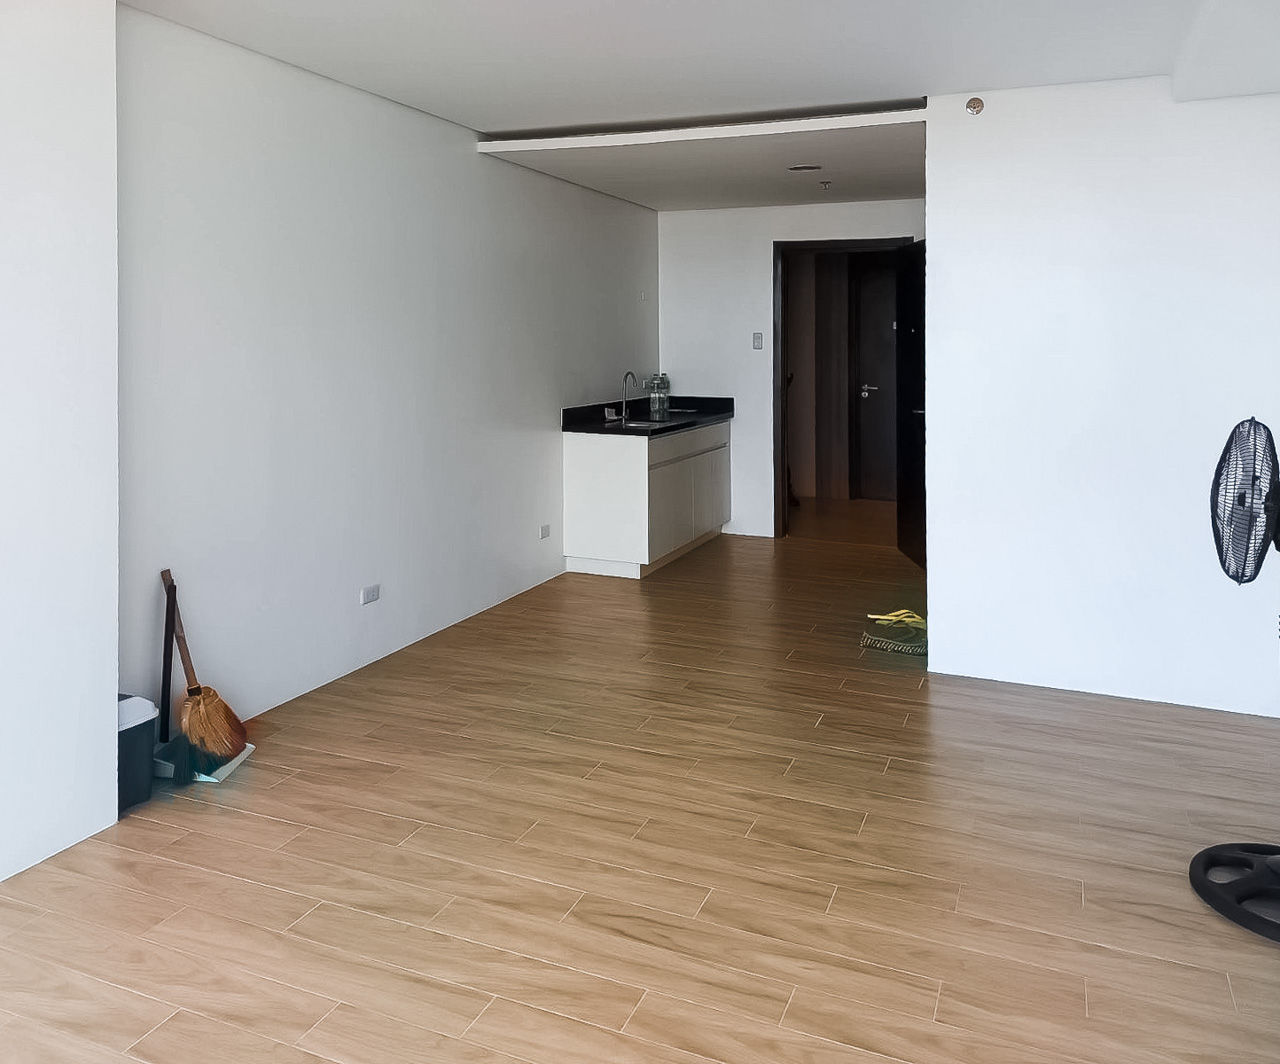 RCPMBA2 30 SqM Office Residential Space for Rent in Cebu - 4